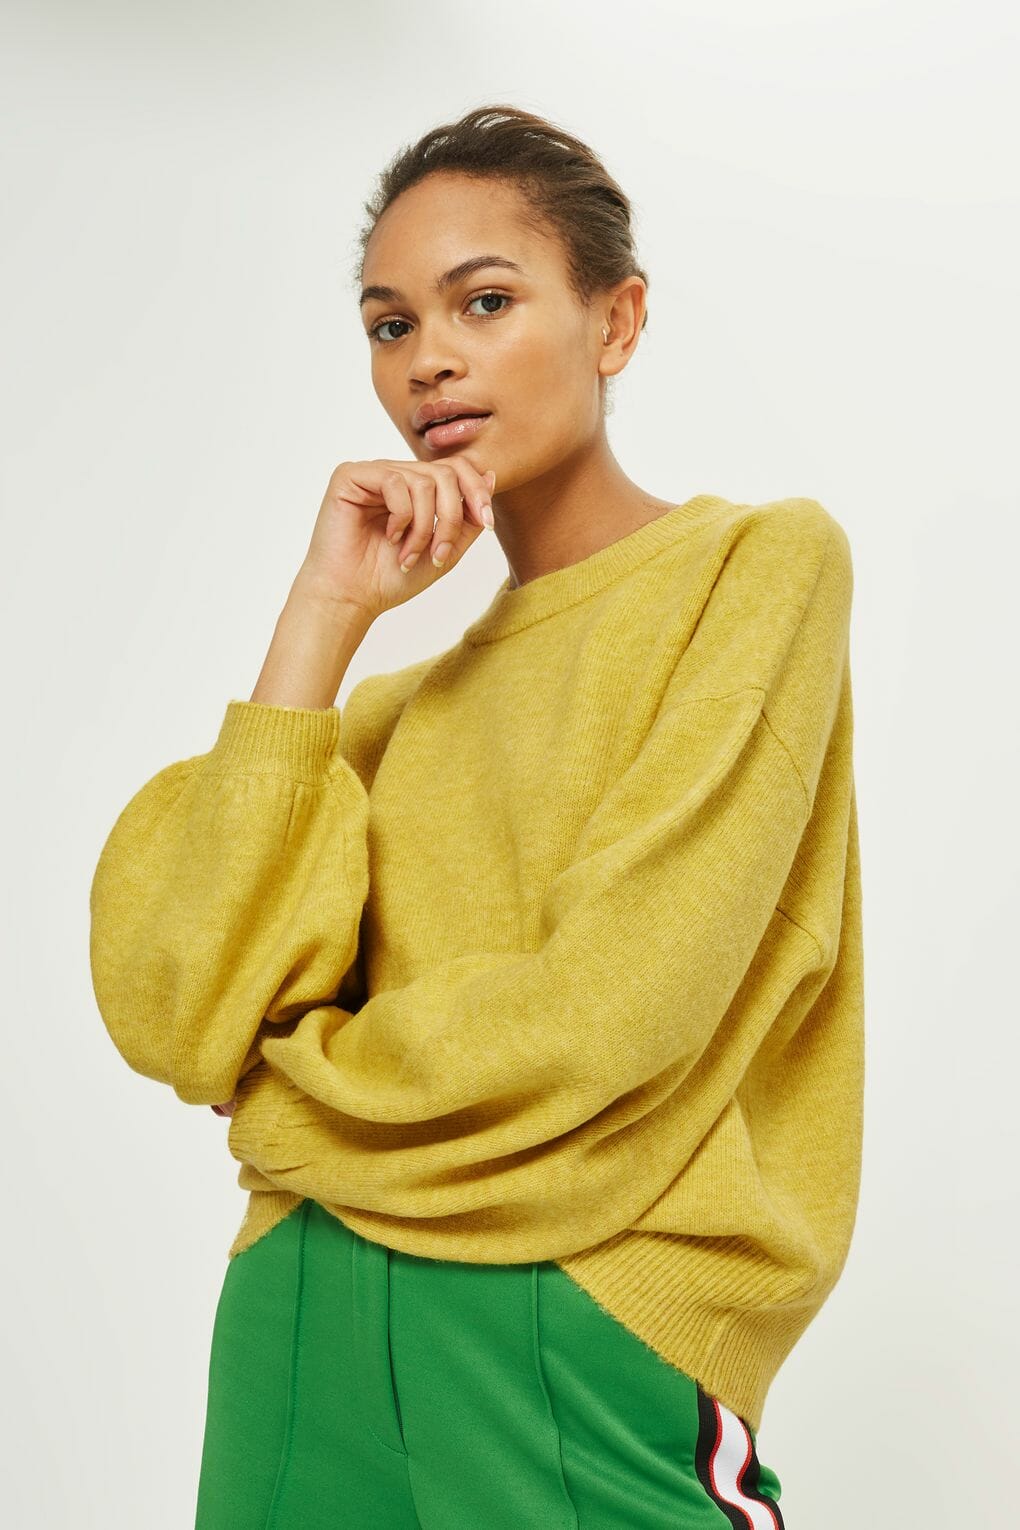 A sweater to cozy up to - Hither & Thither